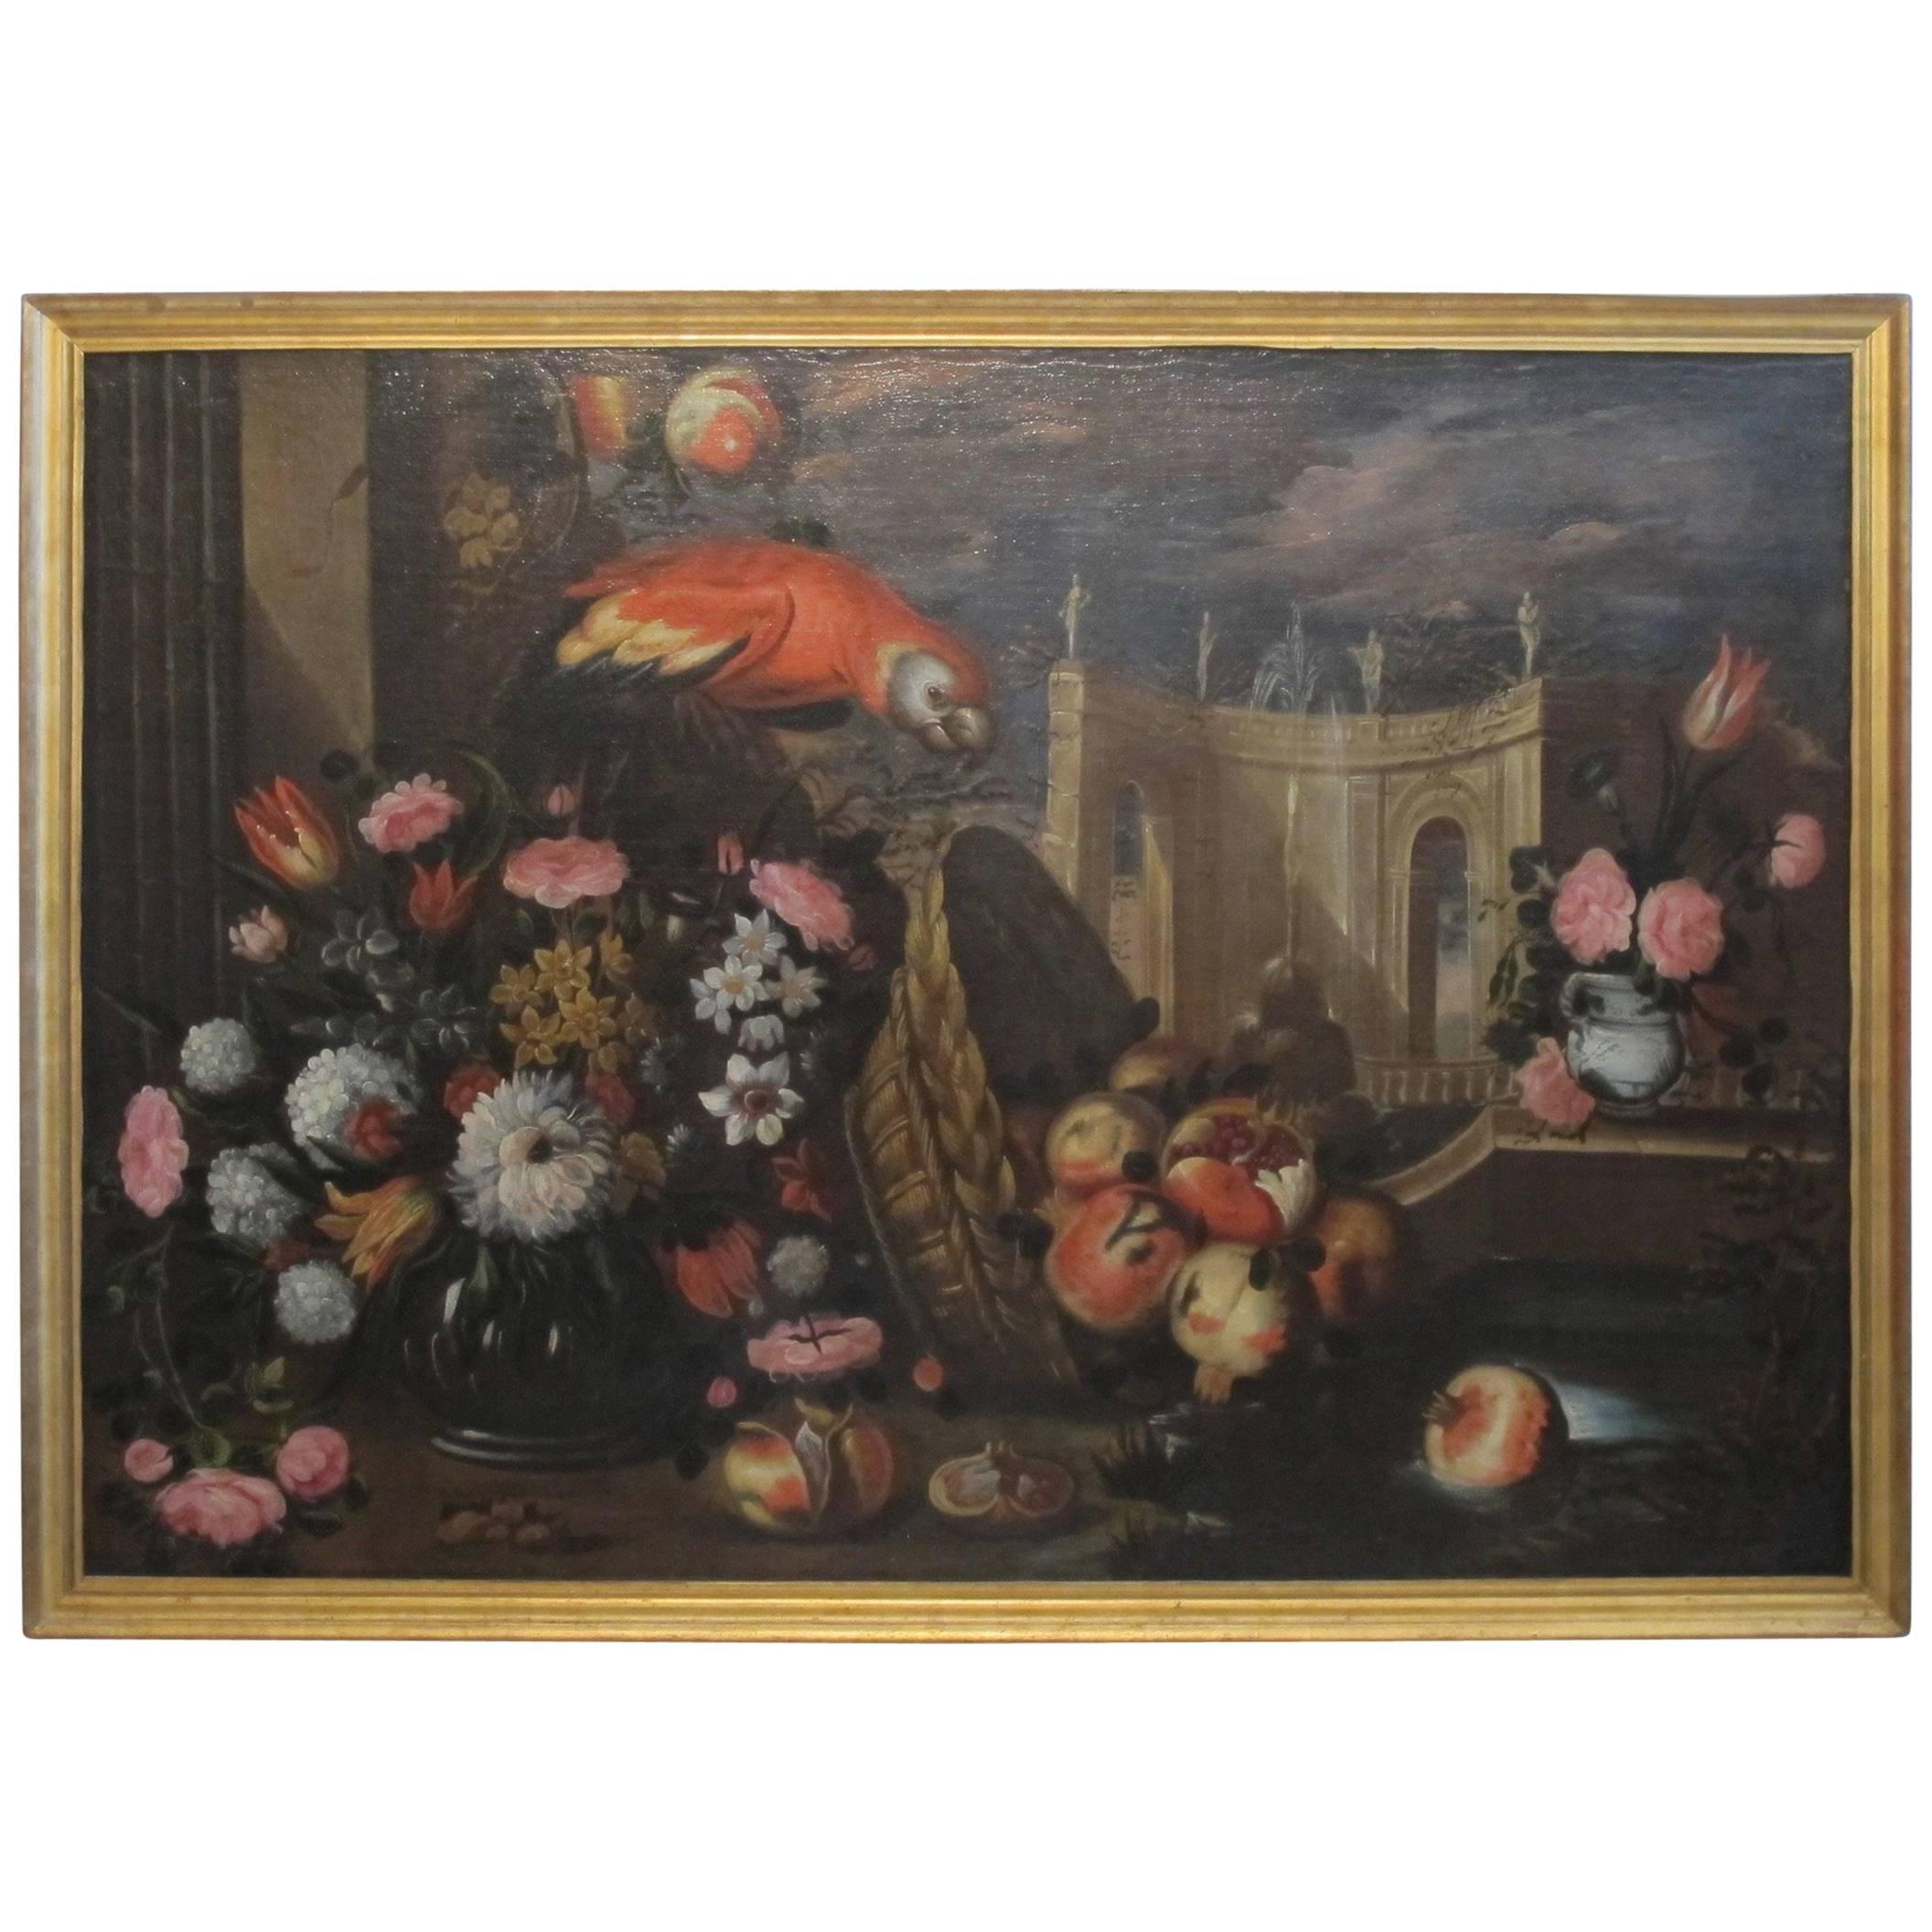 Large 18th Century Italian Still Life Oil Painting with Parrot and Flowers